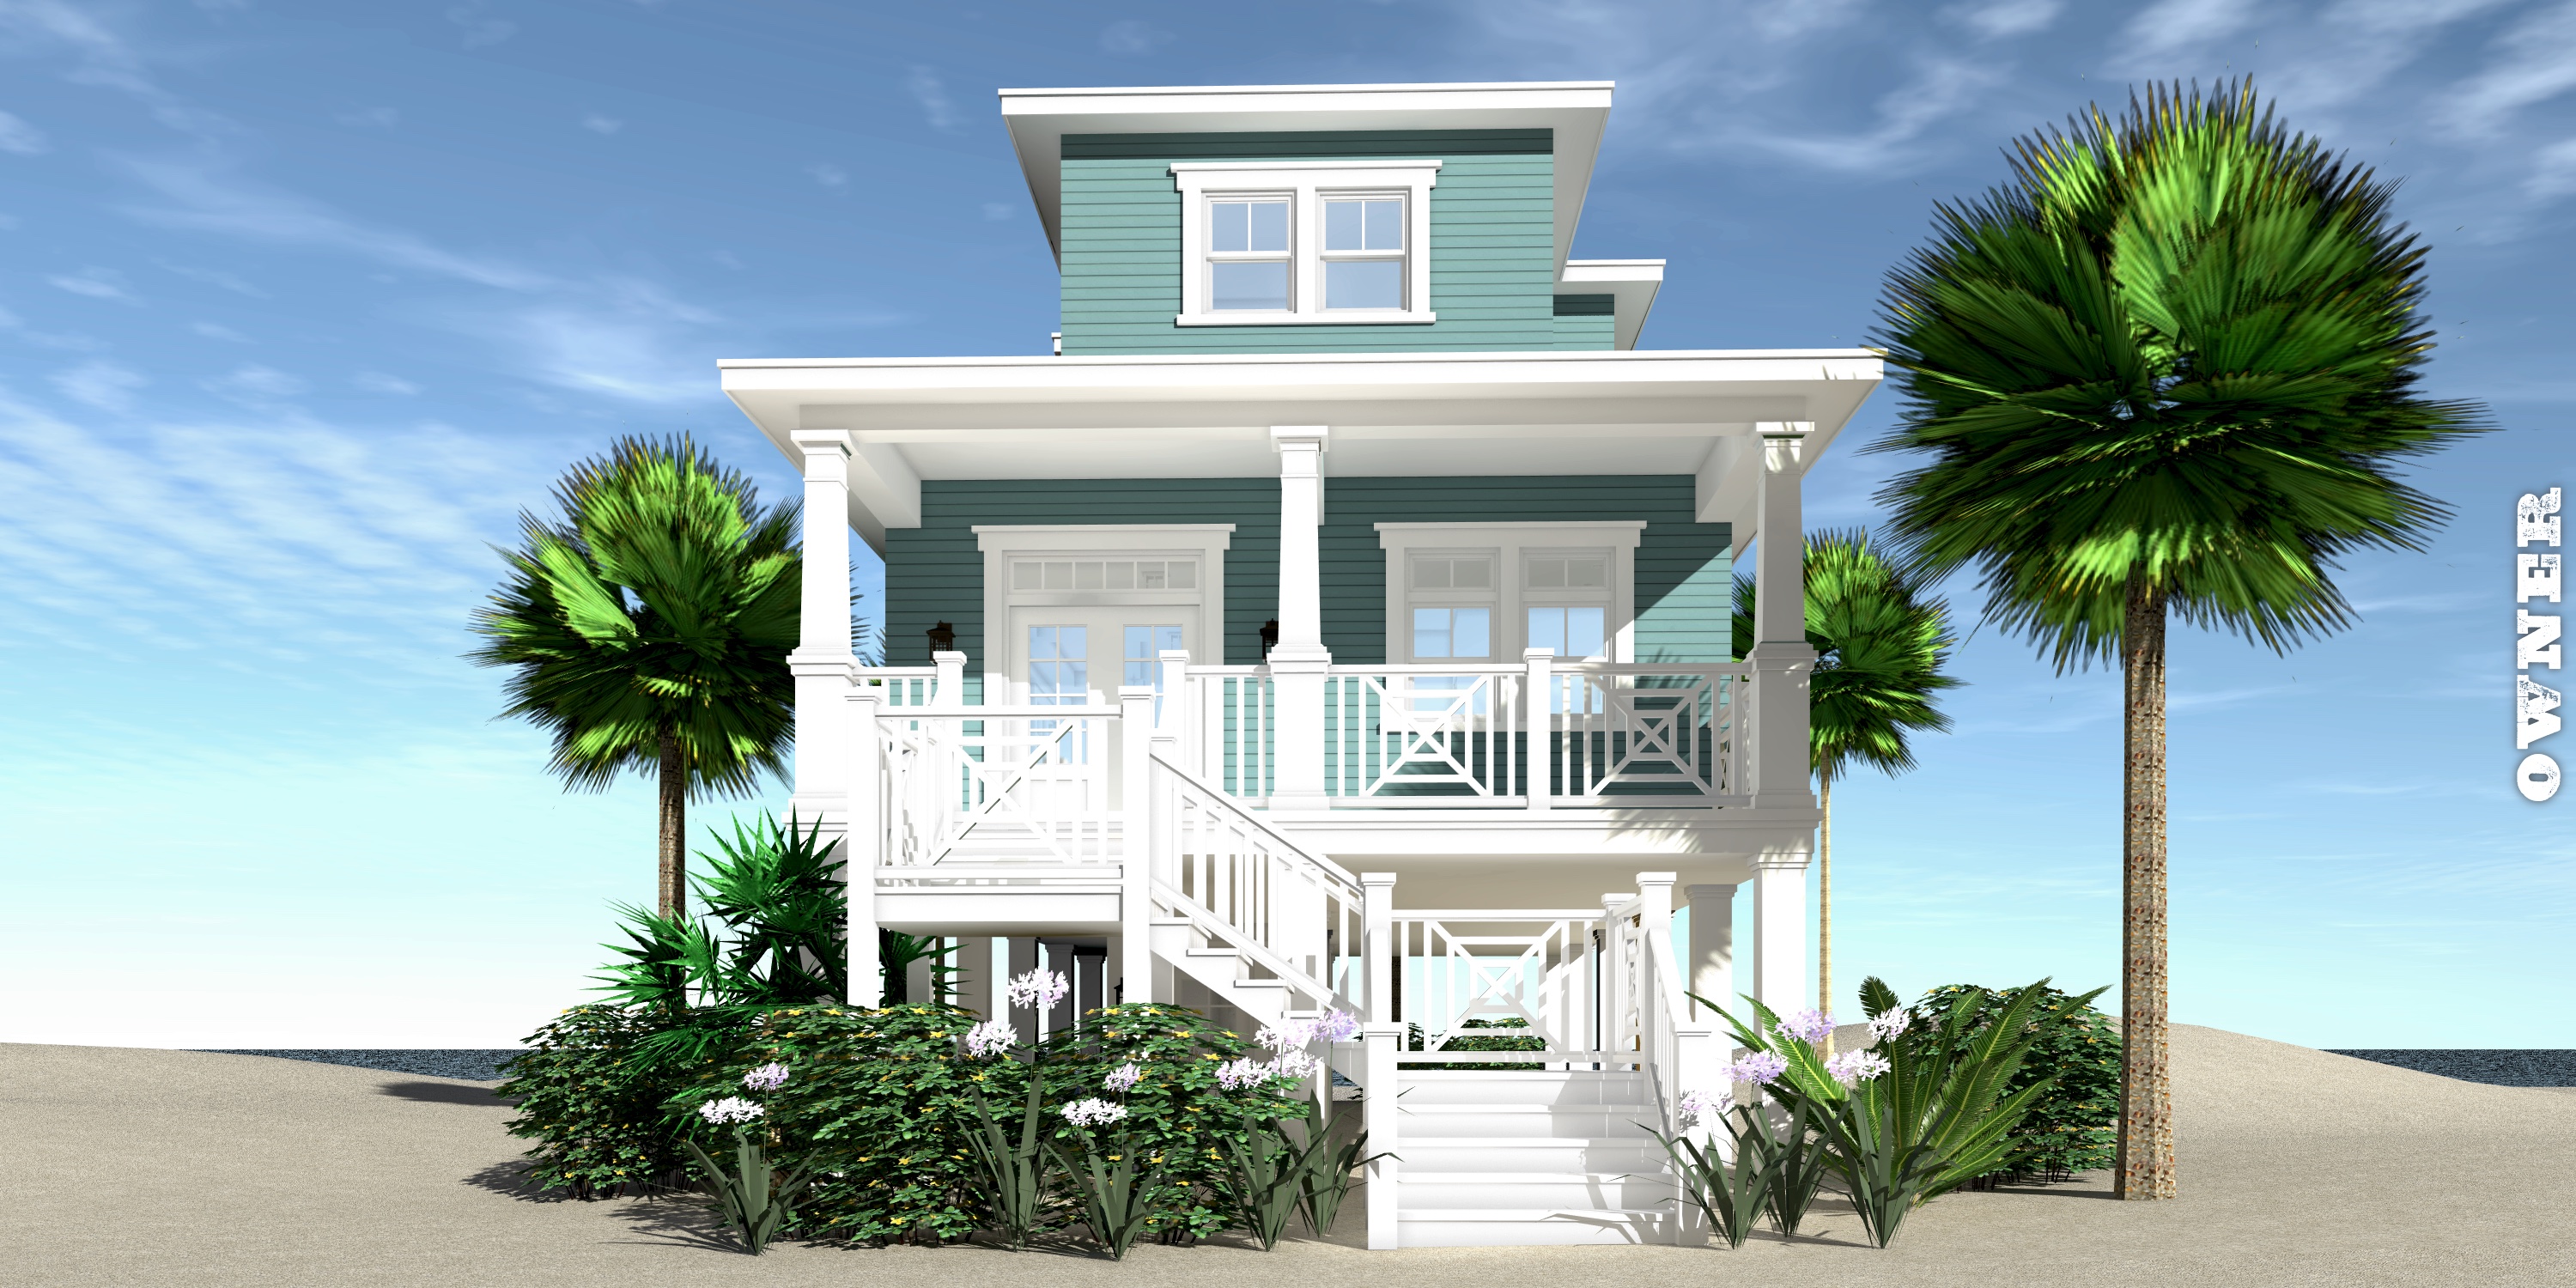 3 Bedroom Beach House Plan with Storage Below. Tyree House Plans.